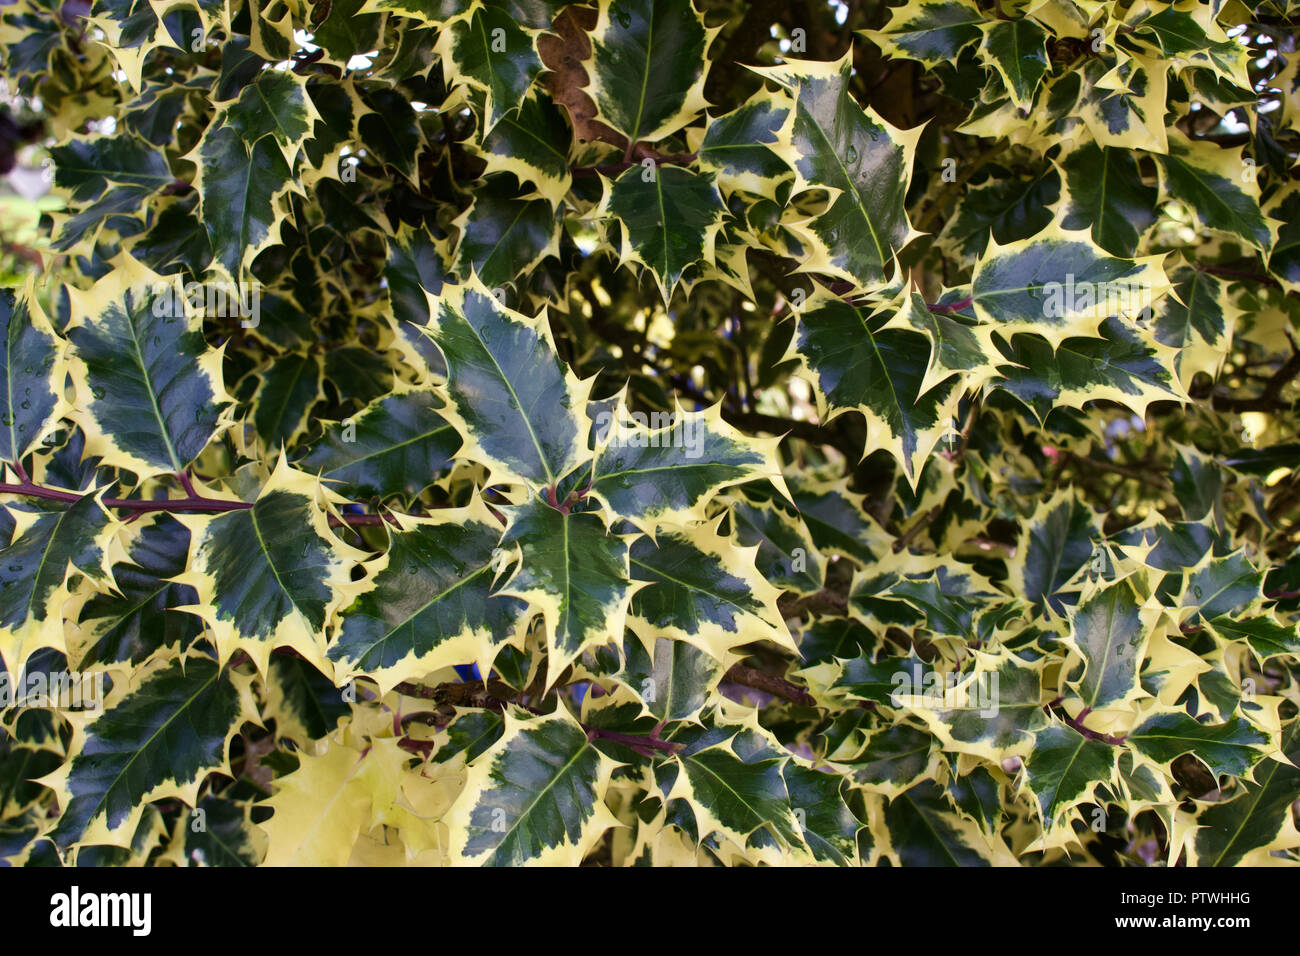 Close up background view of variegated holly plant leaves in full sun Stock Photo